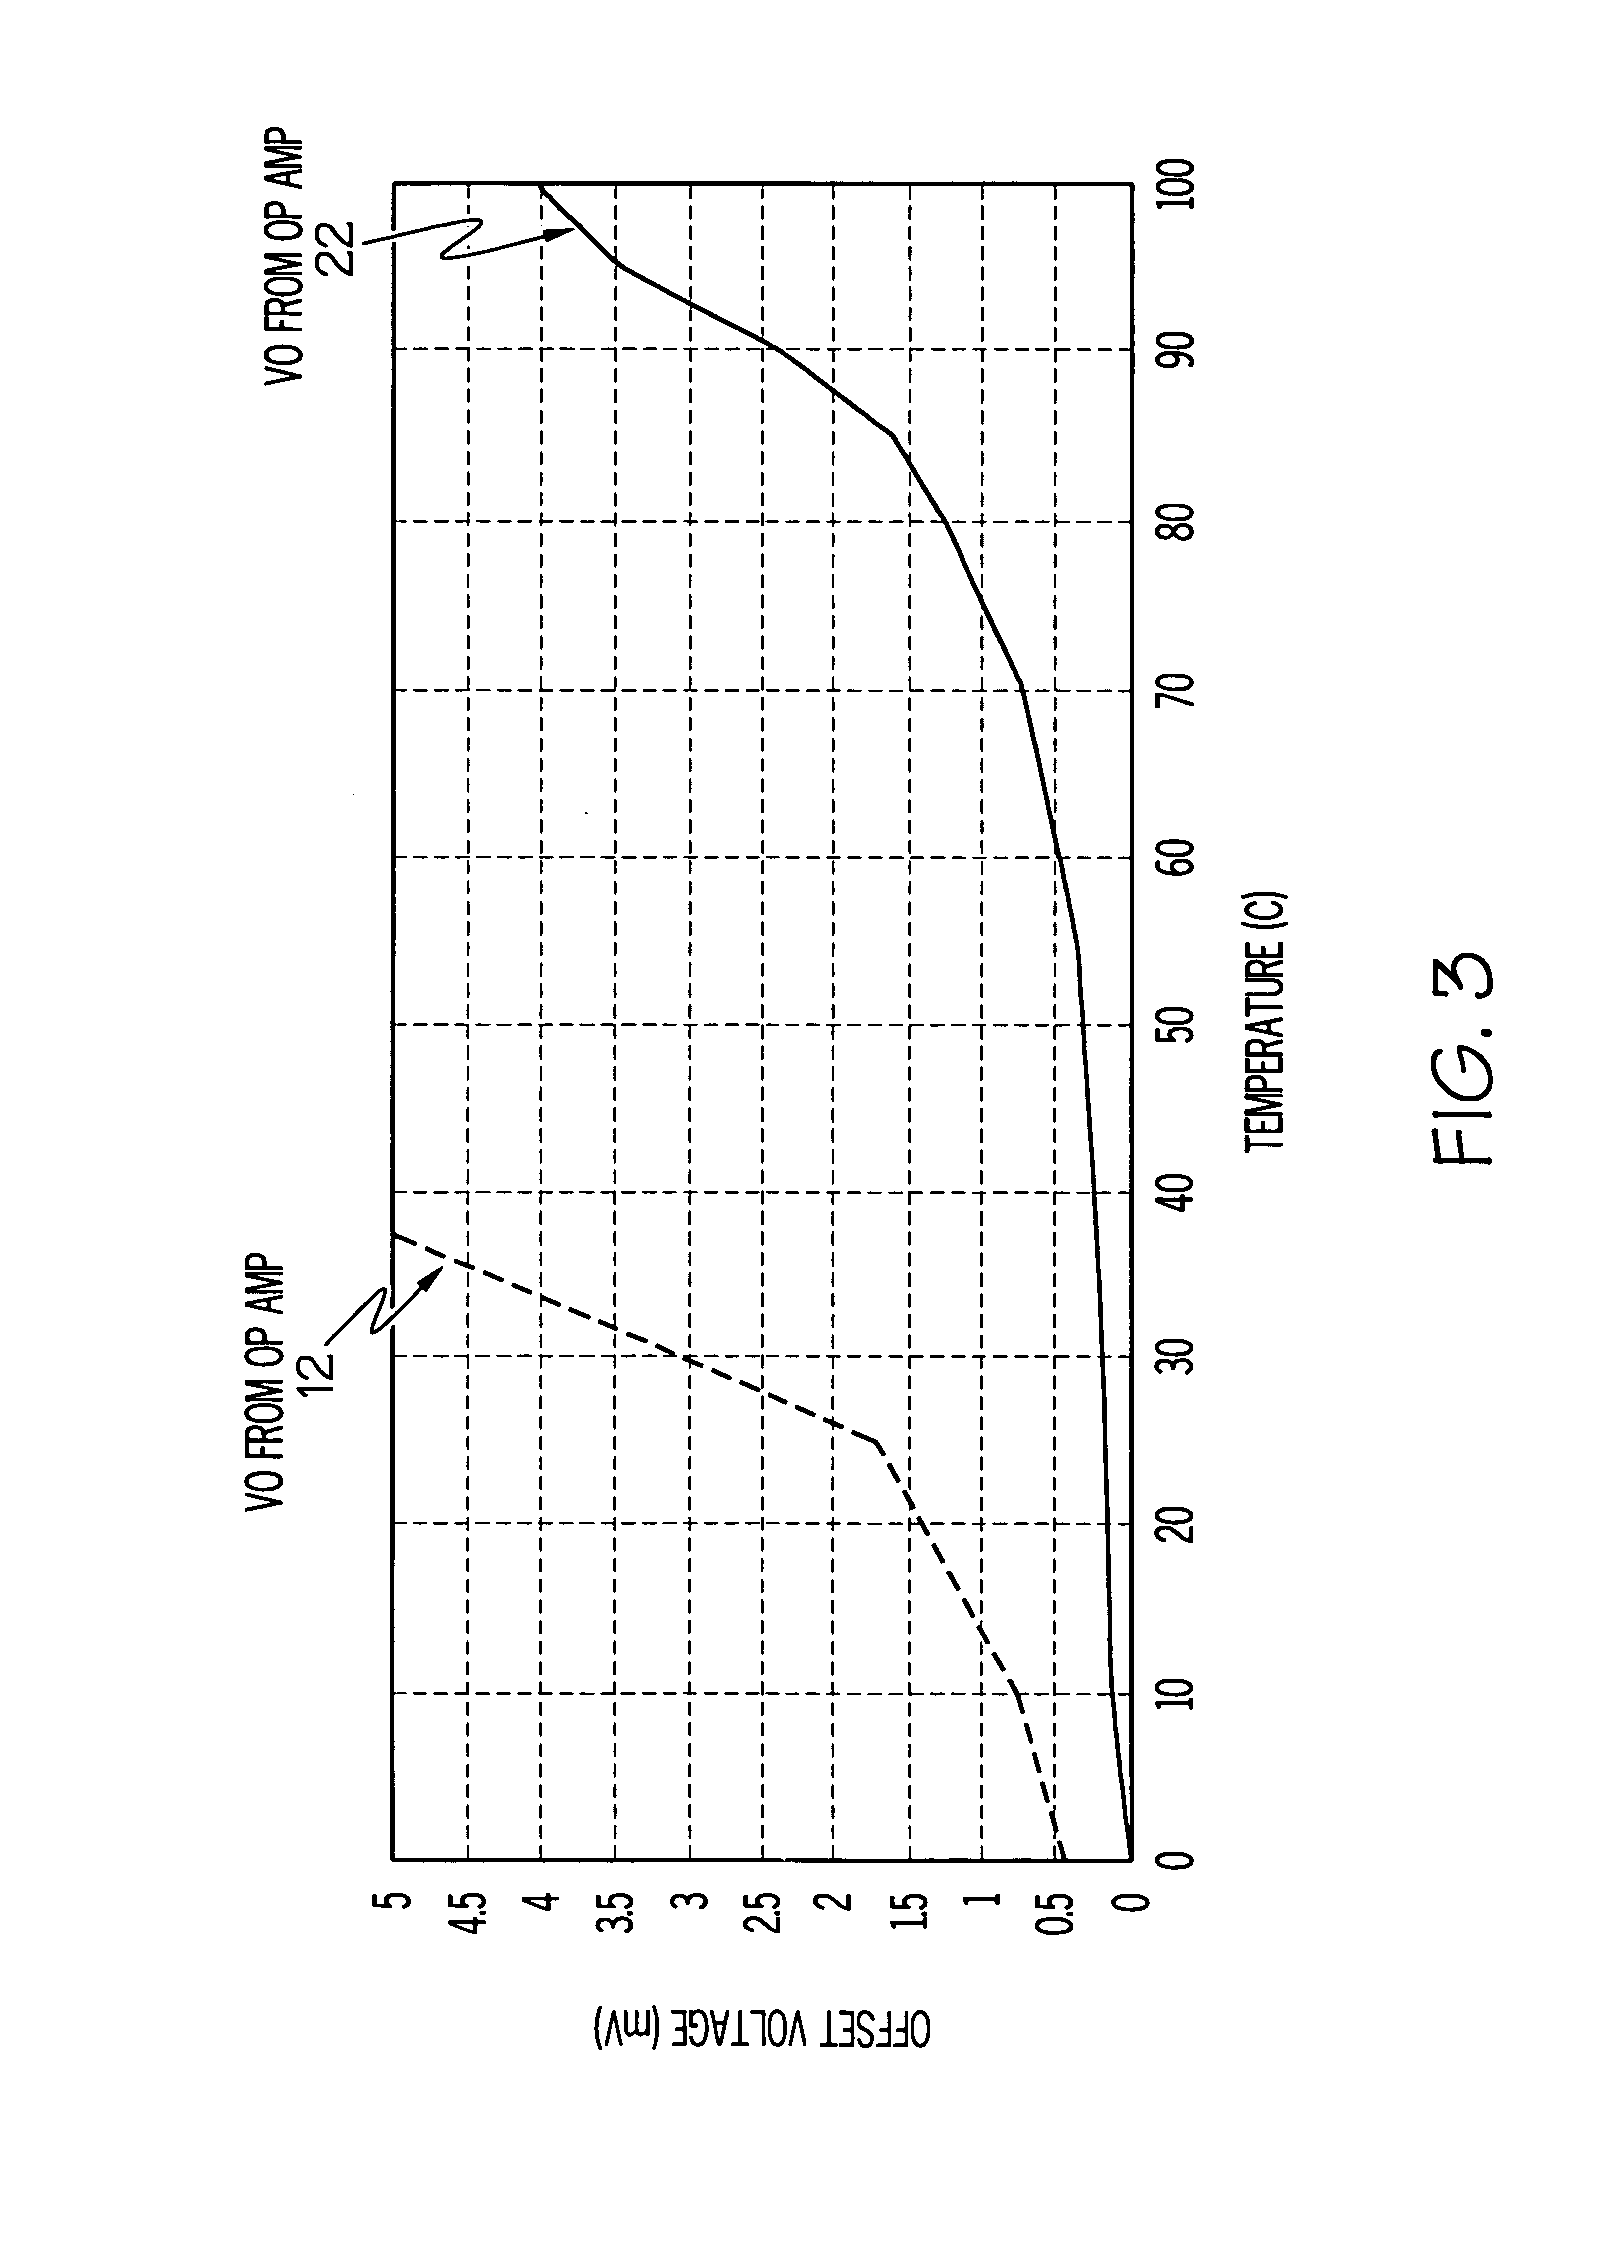 Apparatus for reducing offset voltage drifts in a charge amplifier circuit